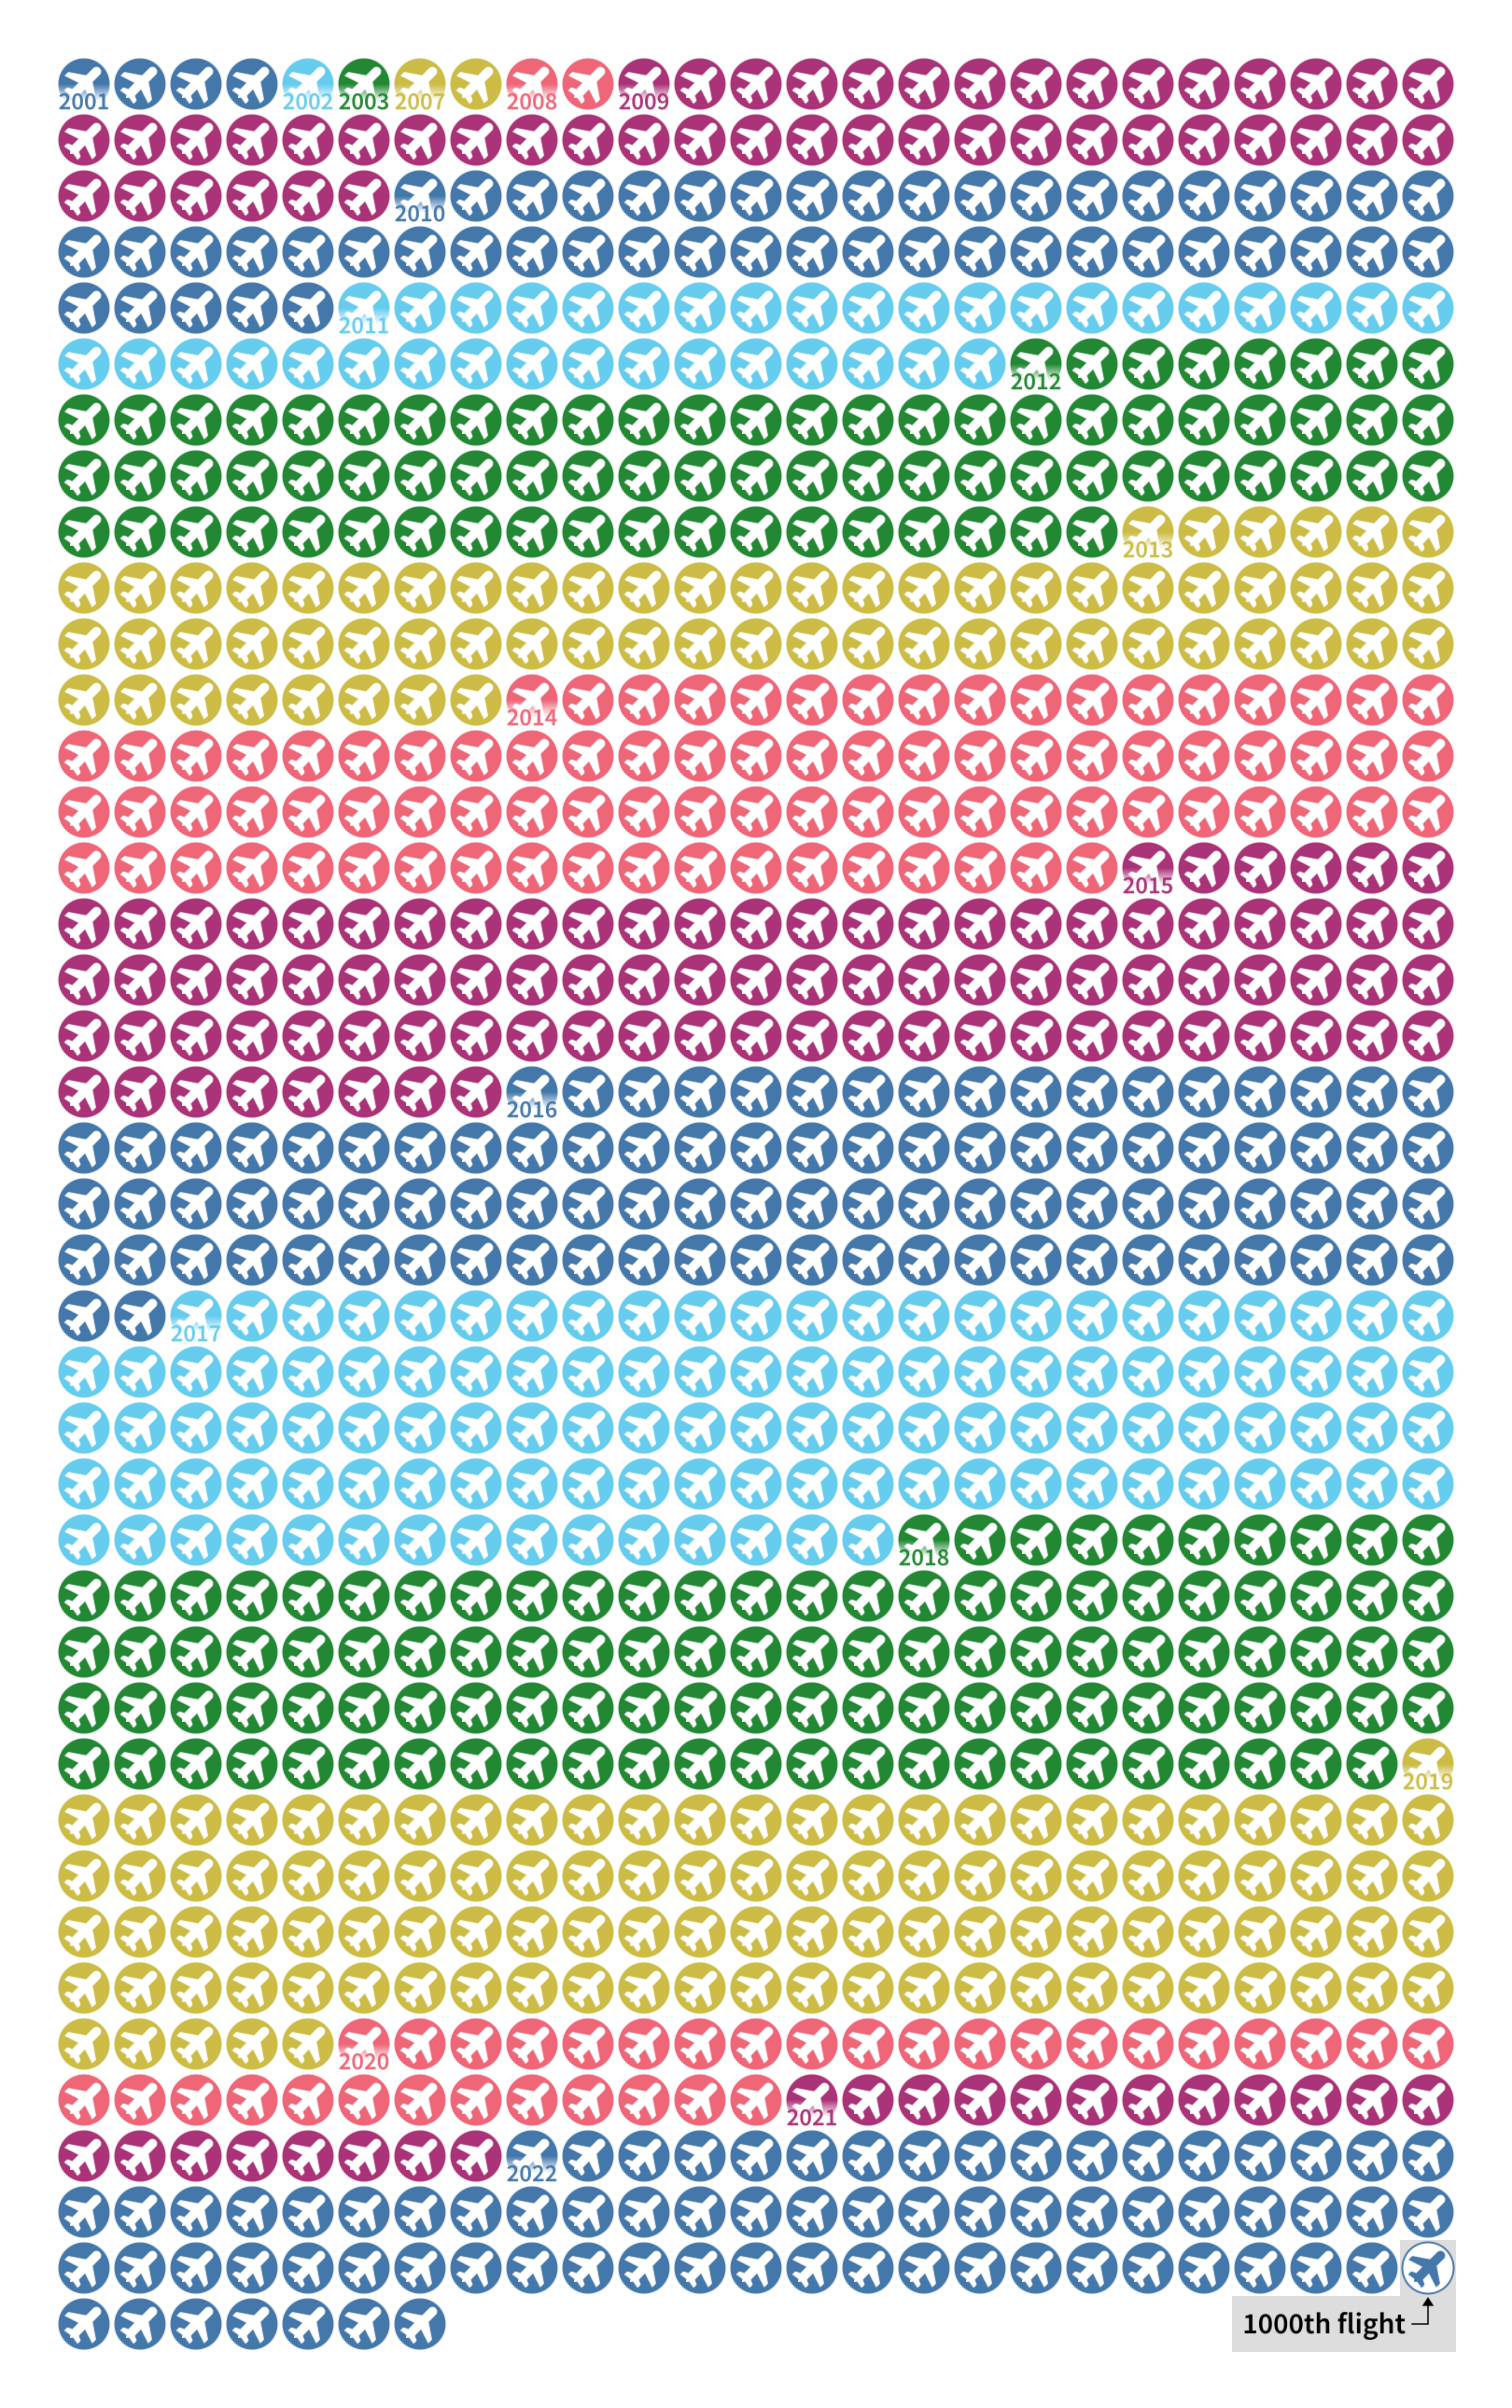 A diagram showing 1007 airplane icons in rows of 25. The icons are color coded by year, and the 1000th icon is highlighted.